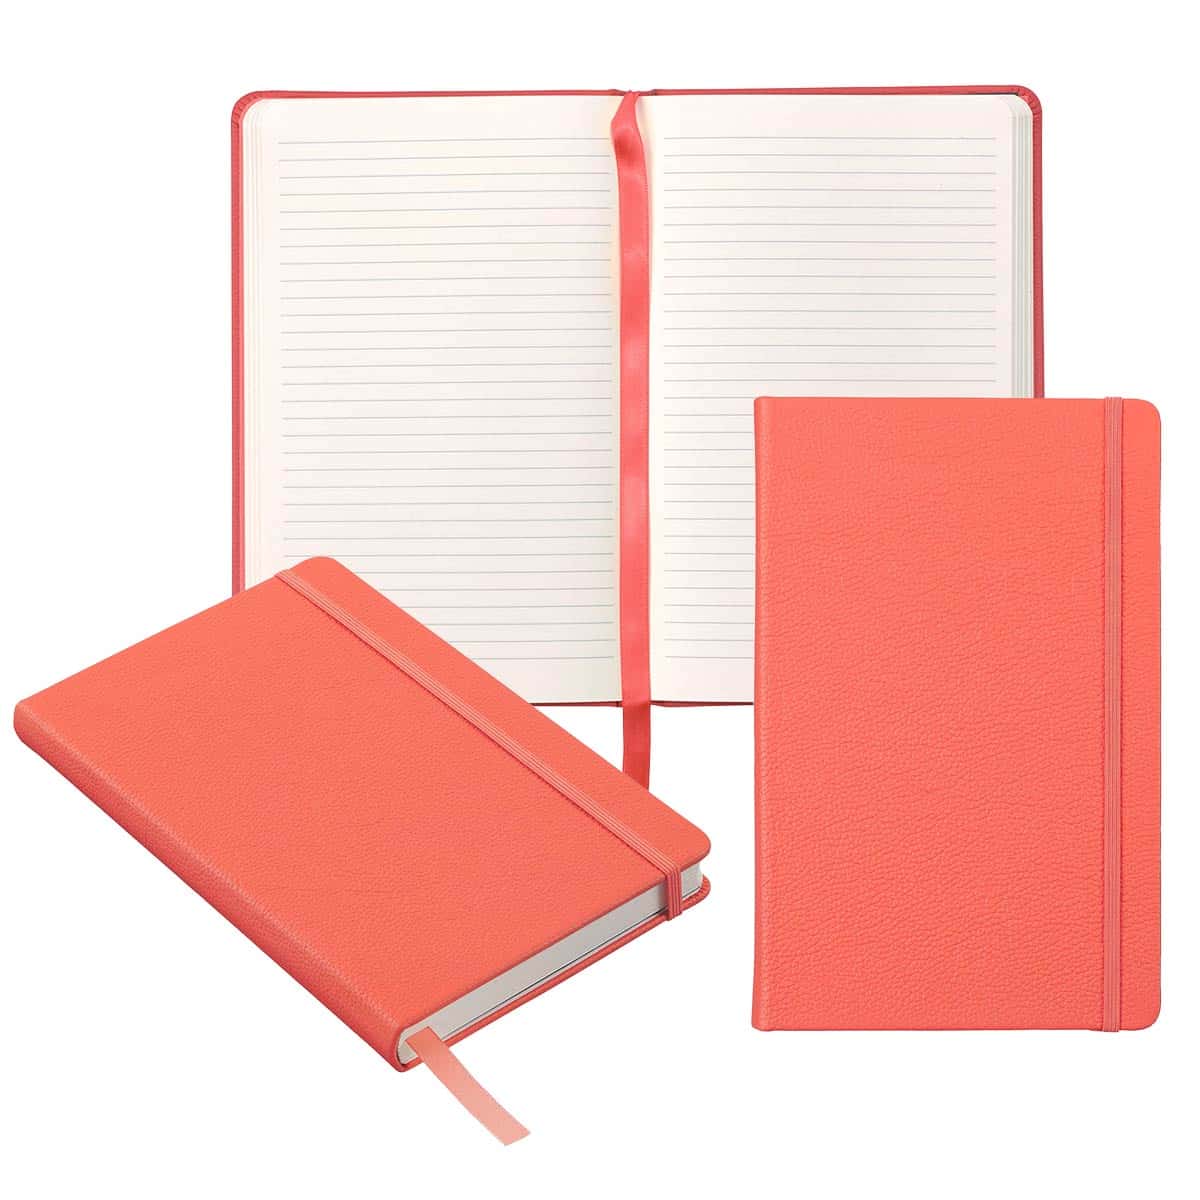 Three view collage of Coral Red notebook, open with ribbon marker, front view, and diagonal closed view of binding and lower edge of notebook